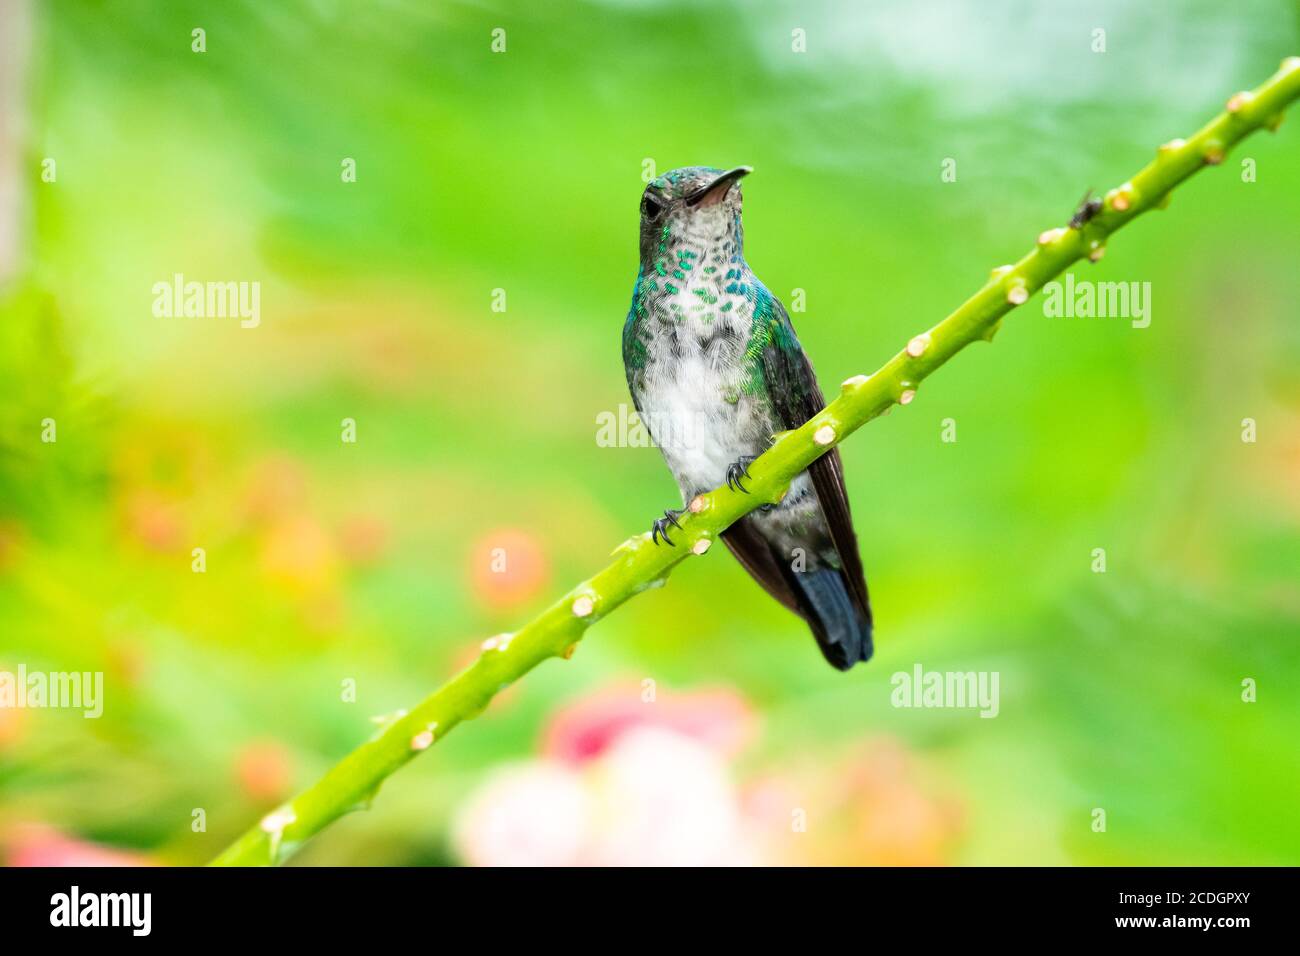 A Blue-chinned Sapphire hummingbird perching with a blurred background. Hummingbird in natural surroundings and natural light. Bird in the wild Stock Photo